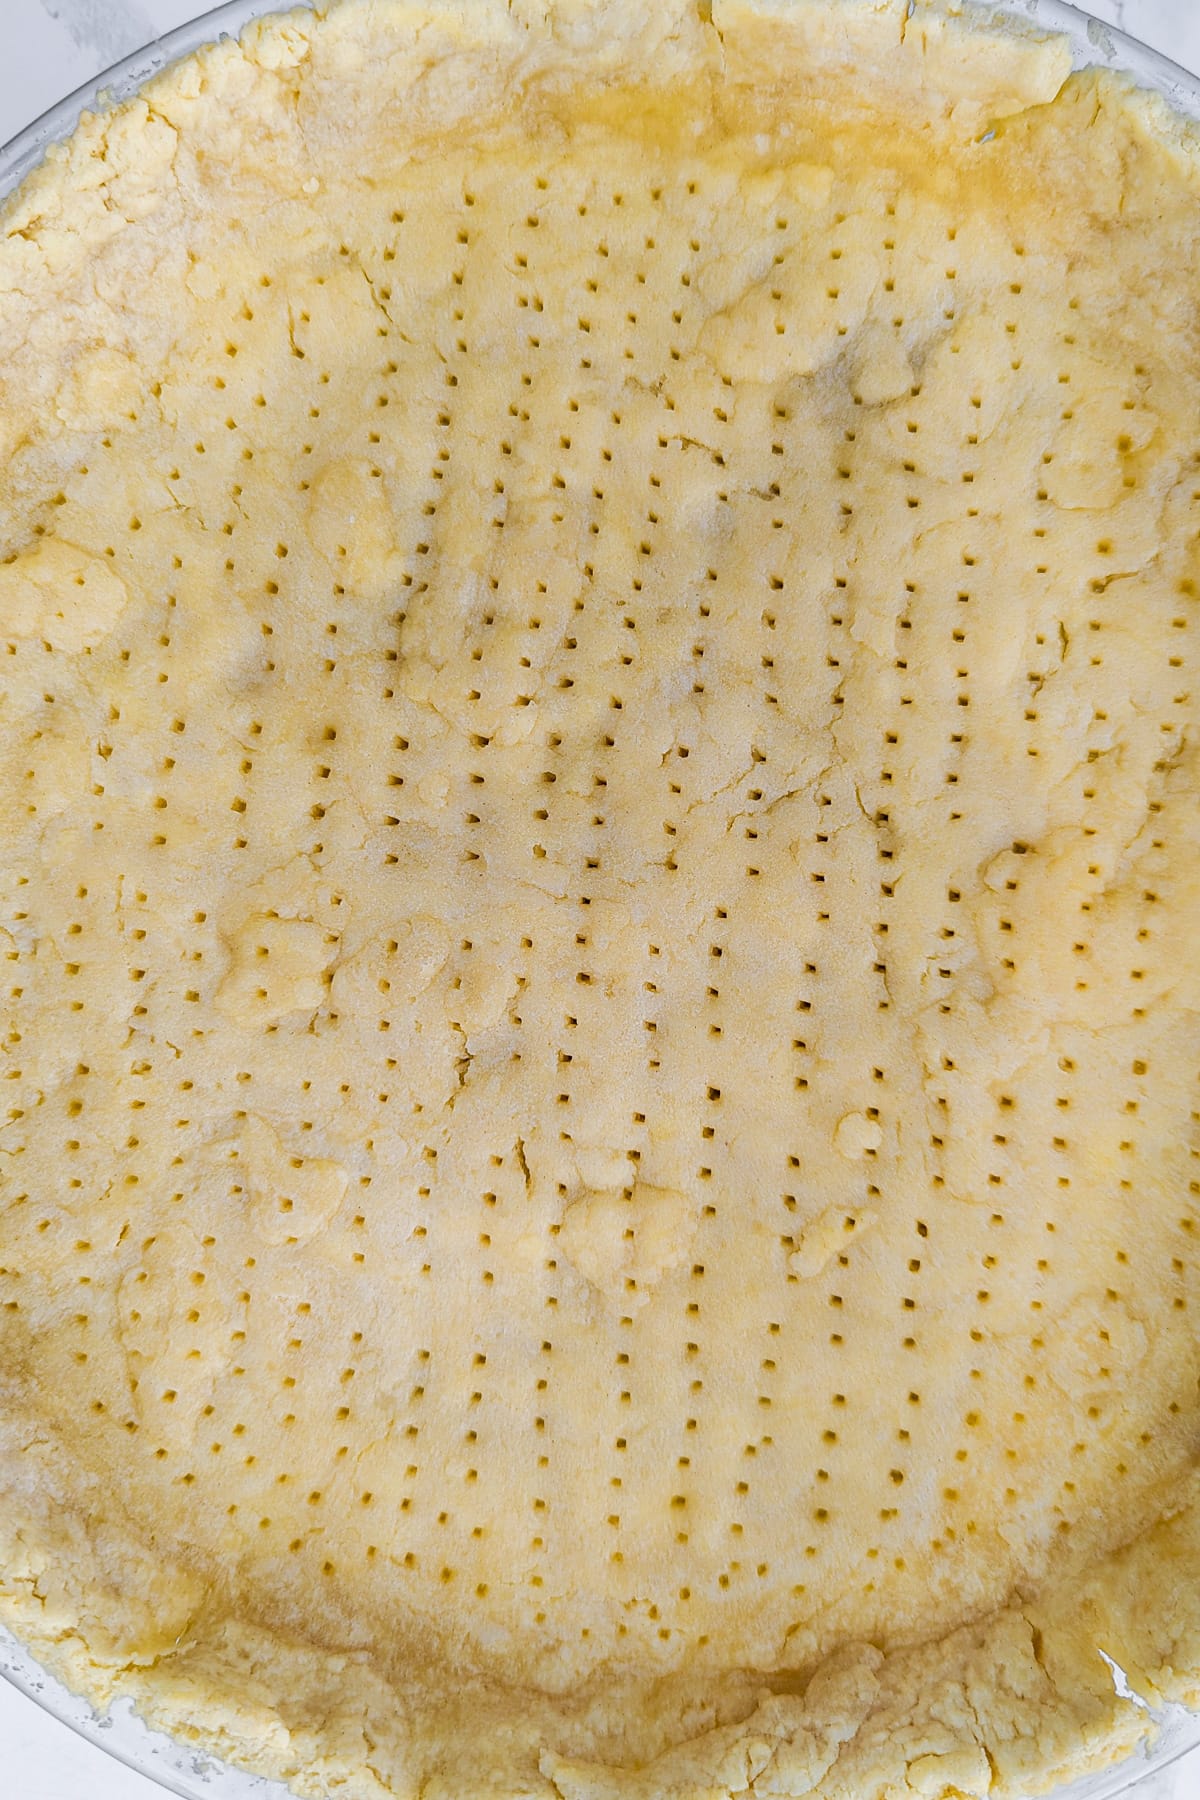 Top view of a sheet of a perforated dough layerd in a transparent baking dish.